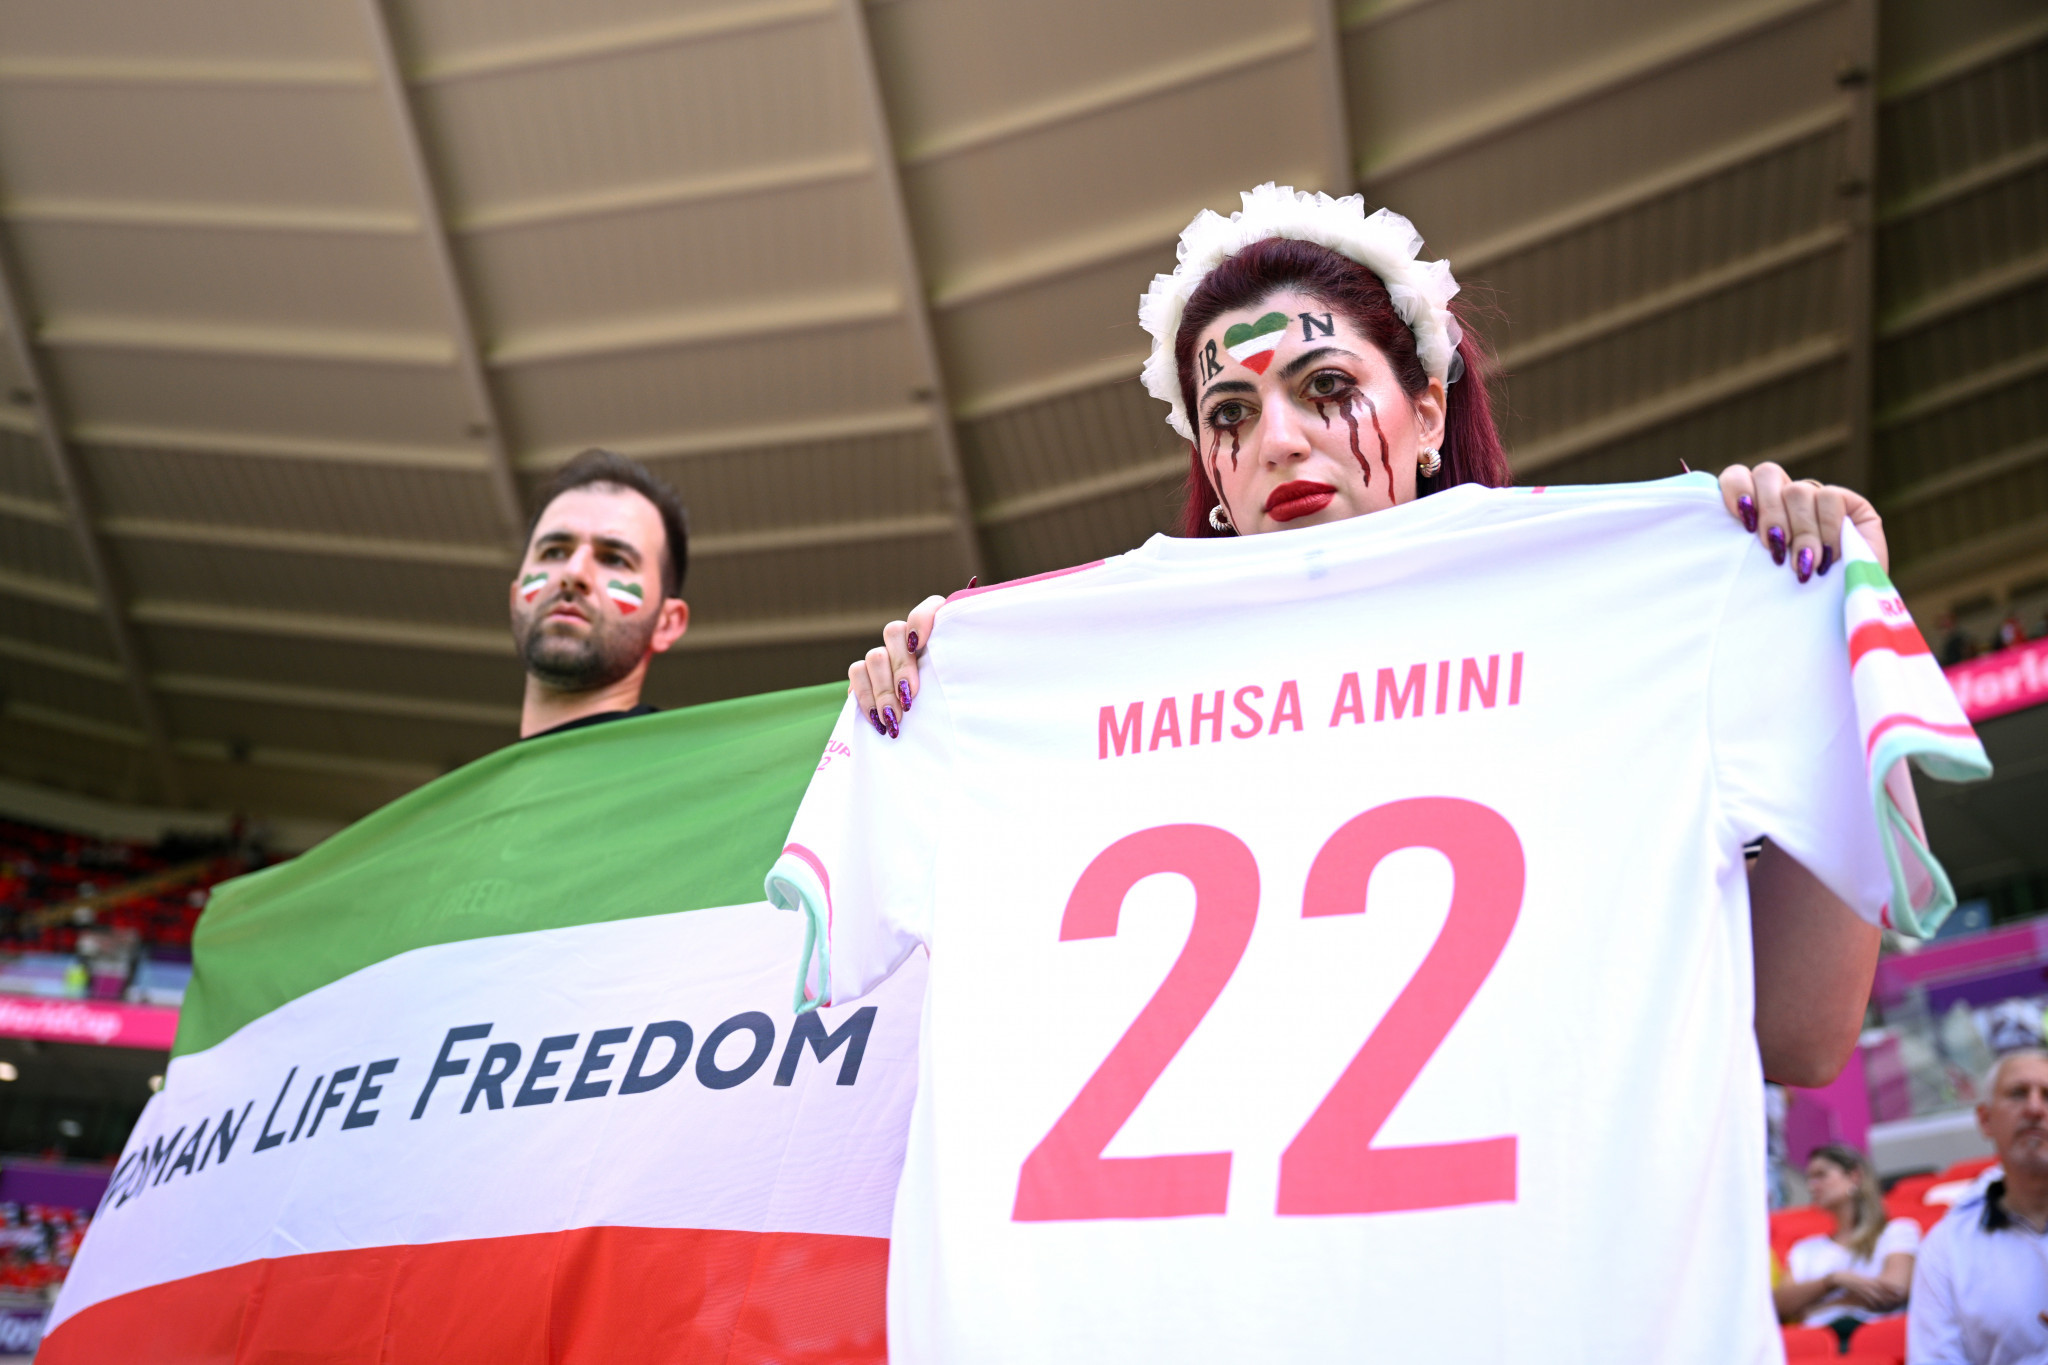 Security at the Ahmed bin Ali Stadium confiscated an Iran shirt bearing Mahsa Amini's name ©Getty Images